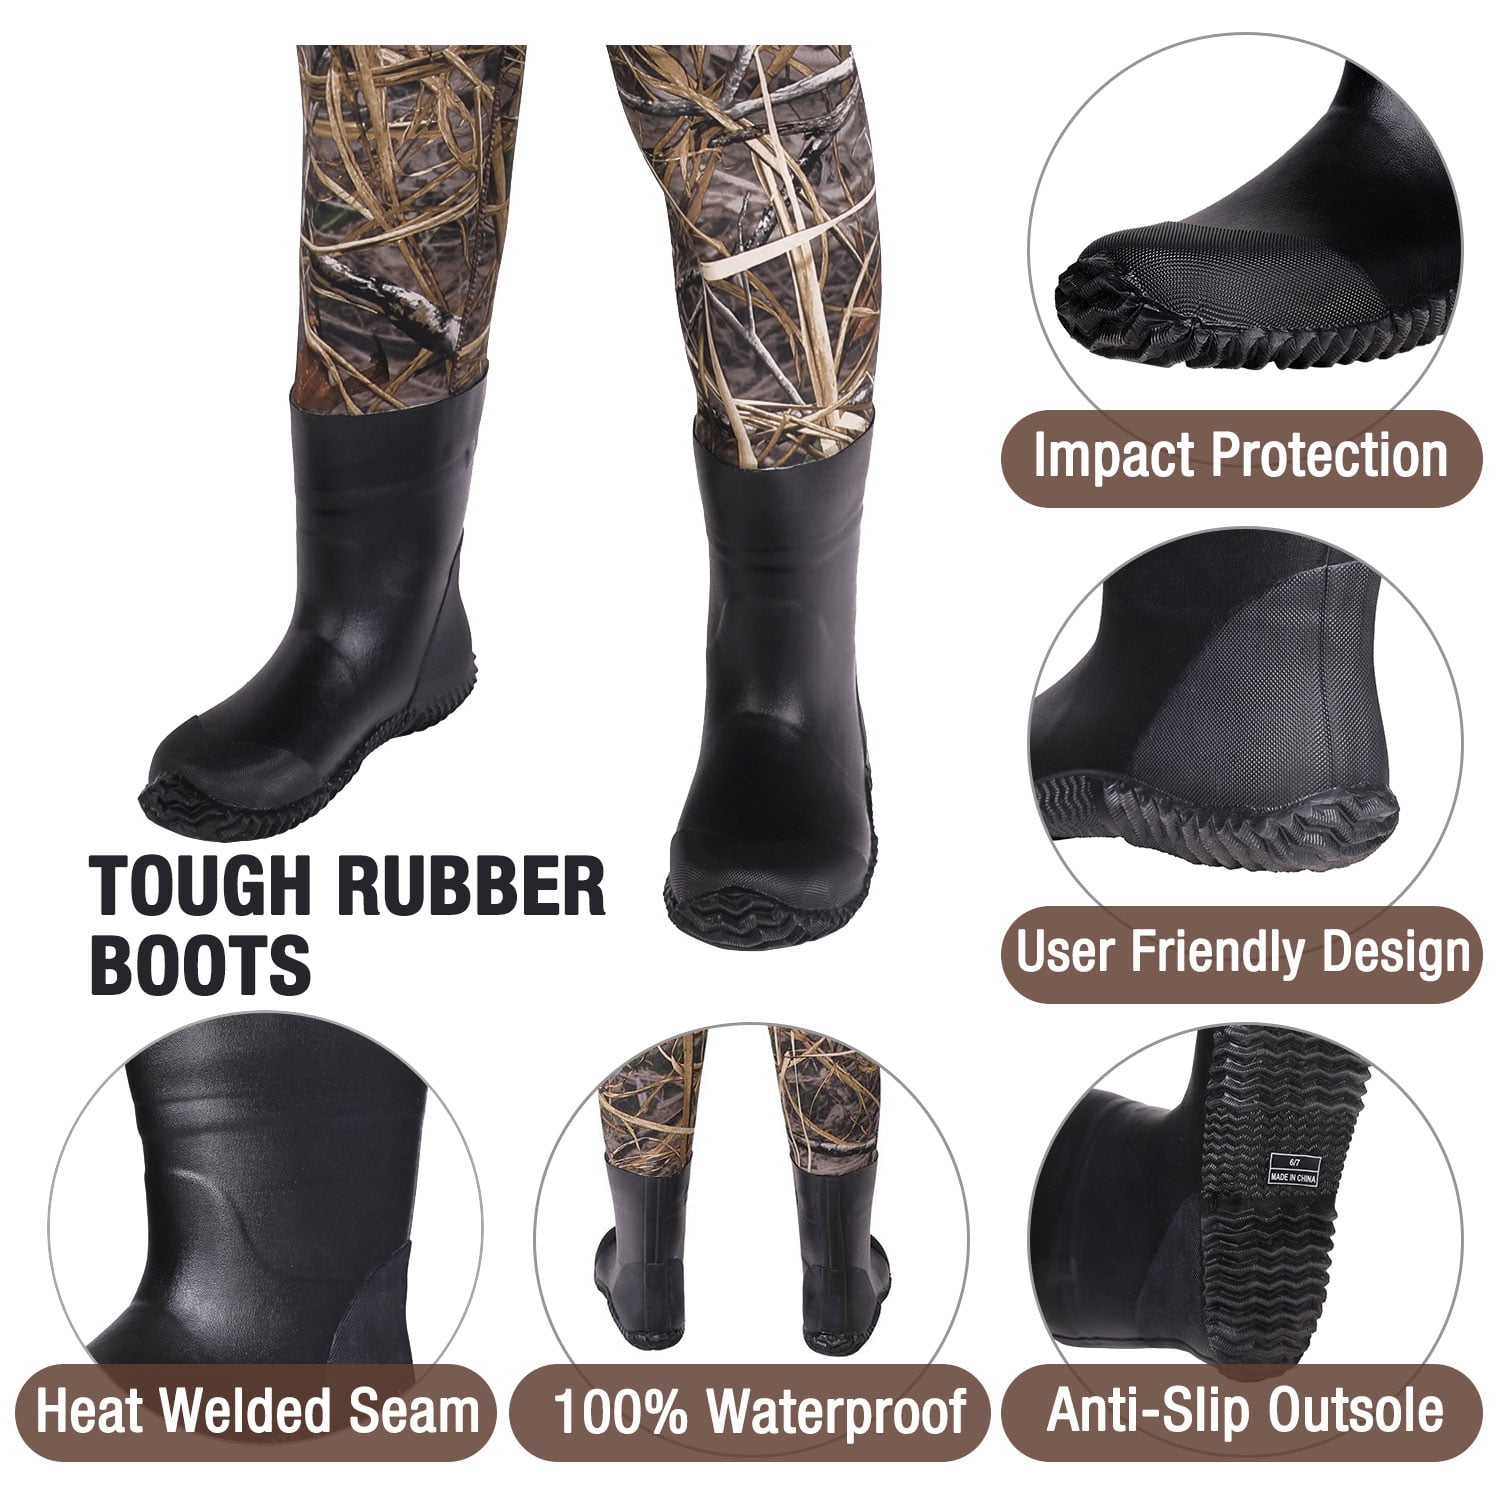 HISEA - Your kids will love having waders of their very